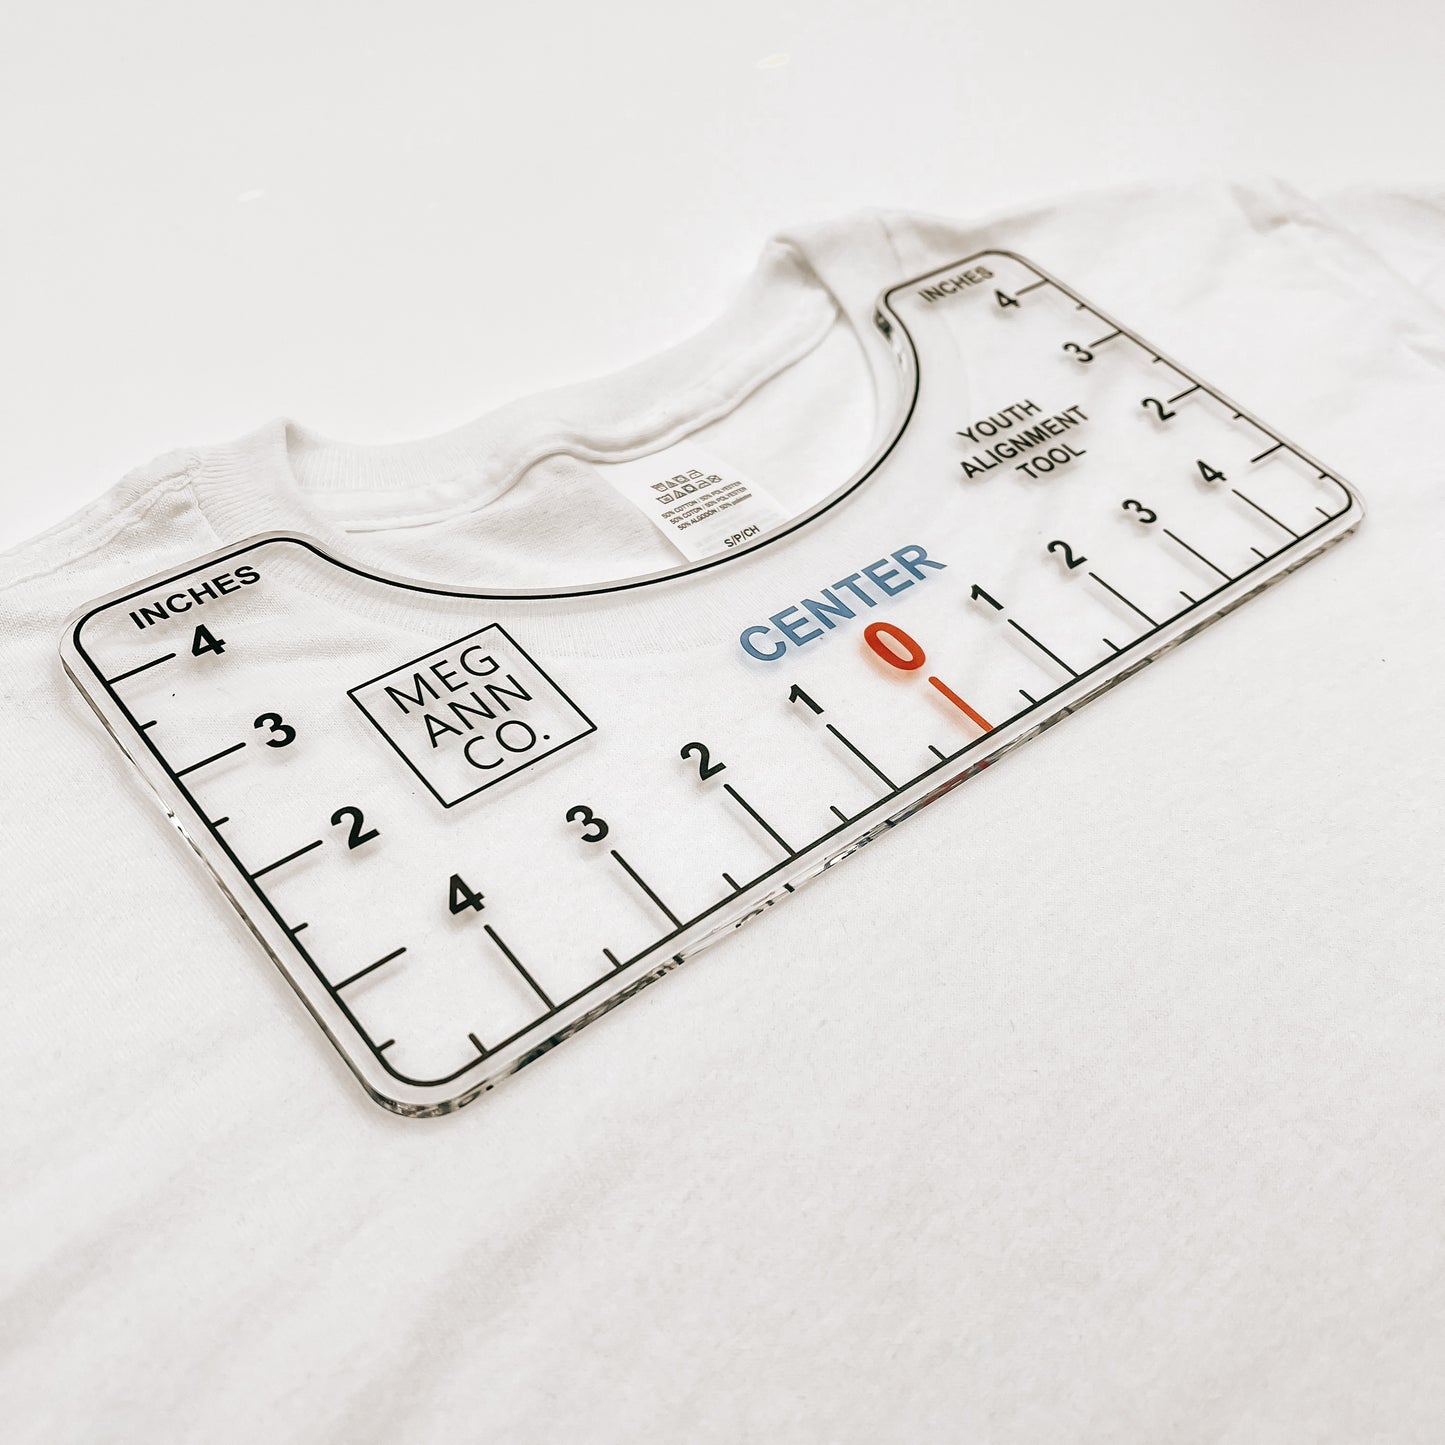 Youth T-Shirt Alignment Ruler